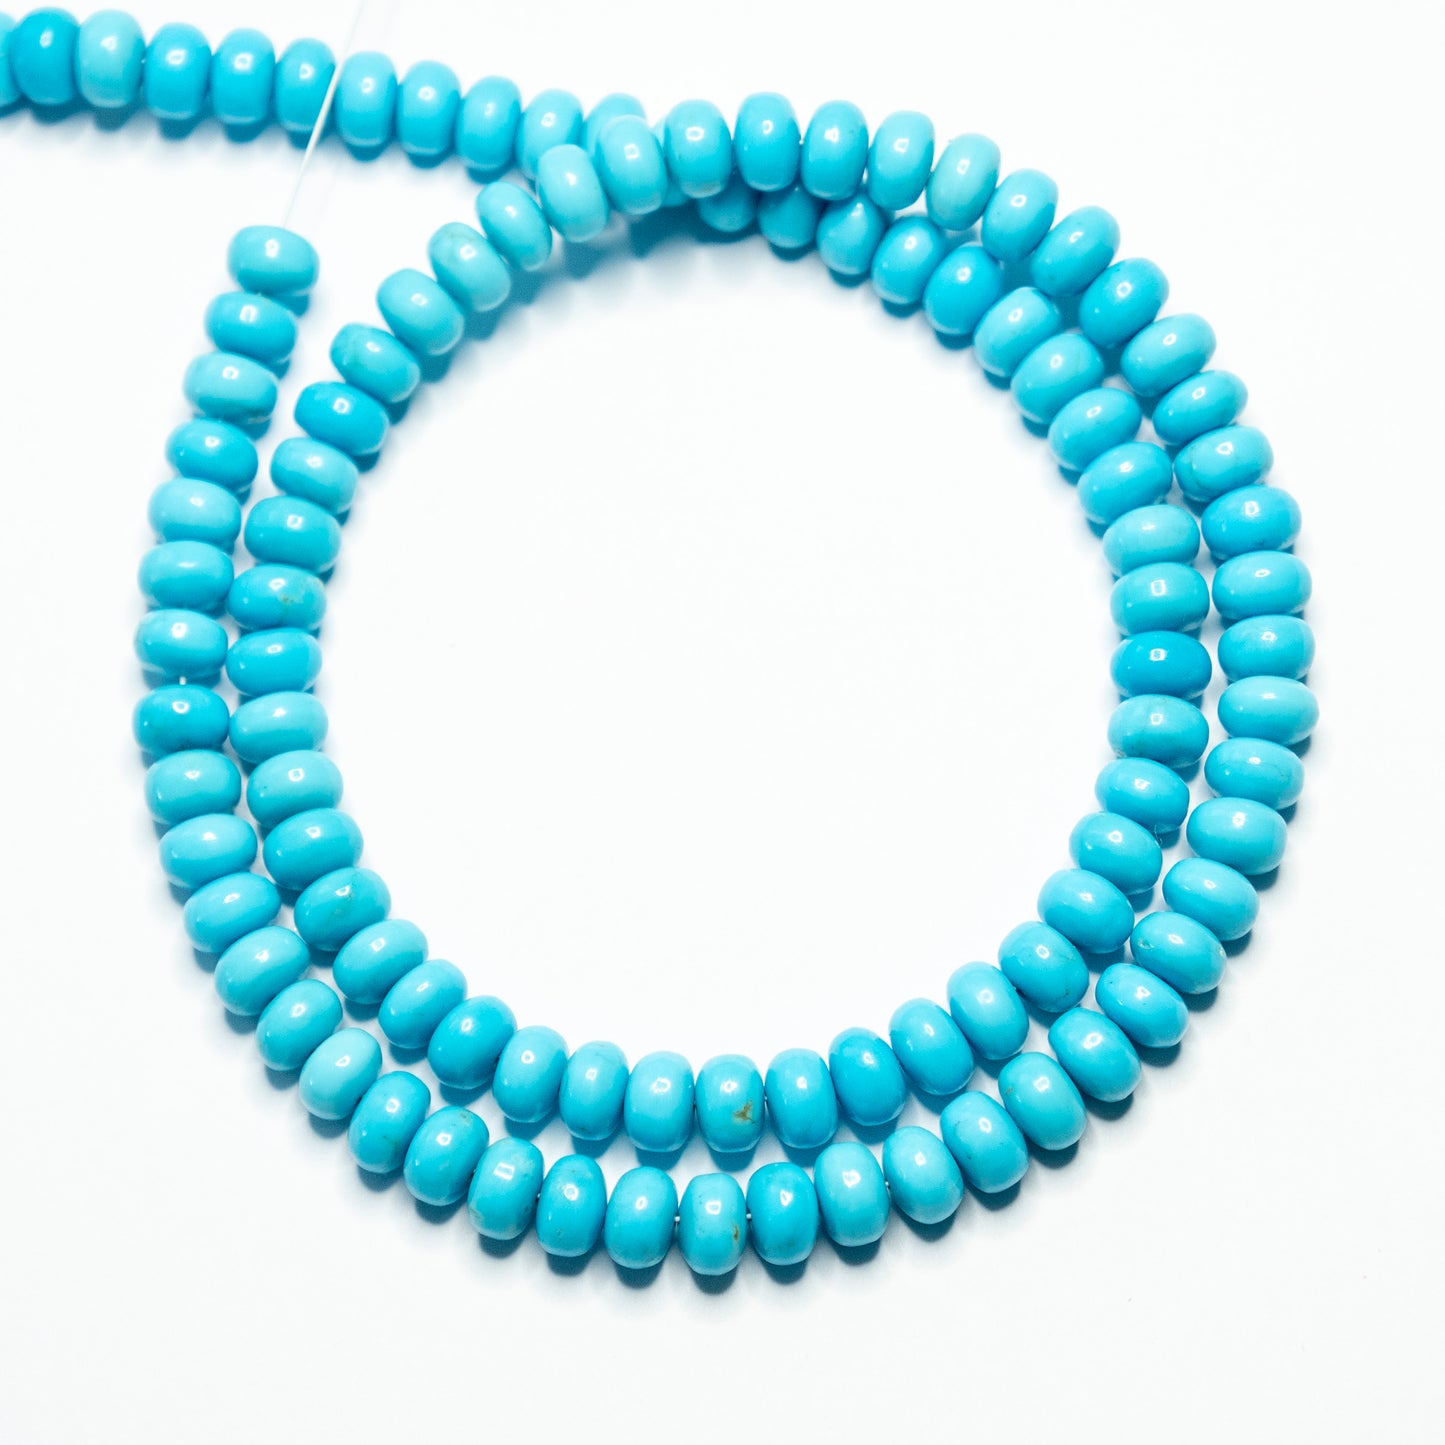 Turquoise Candy Necklace - 6mm